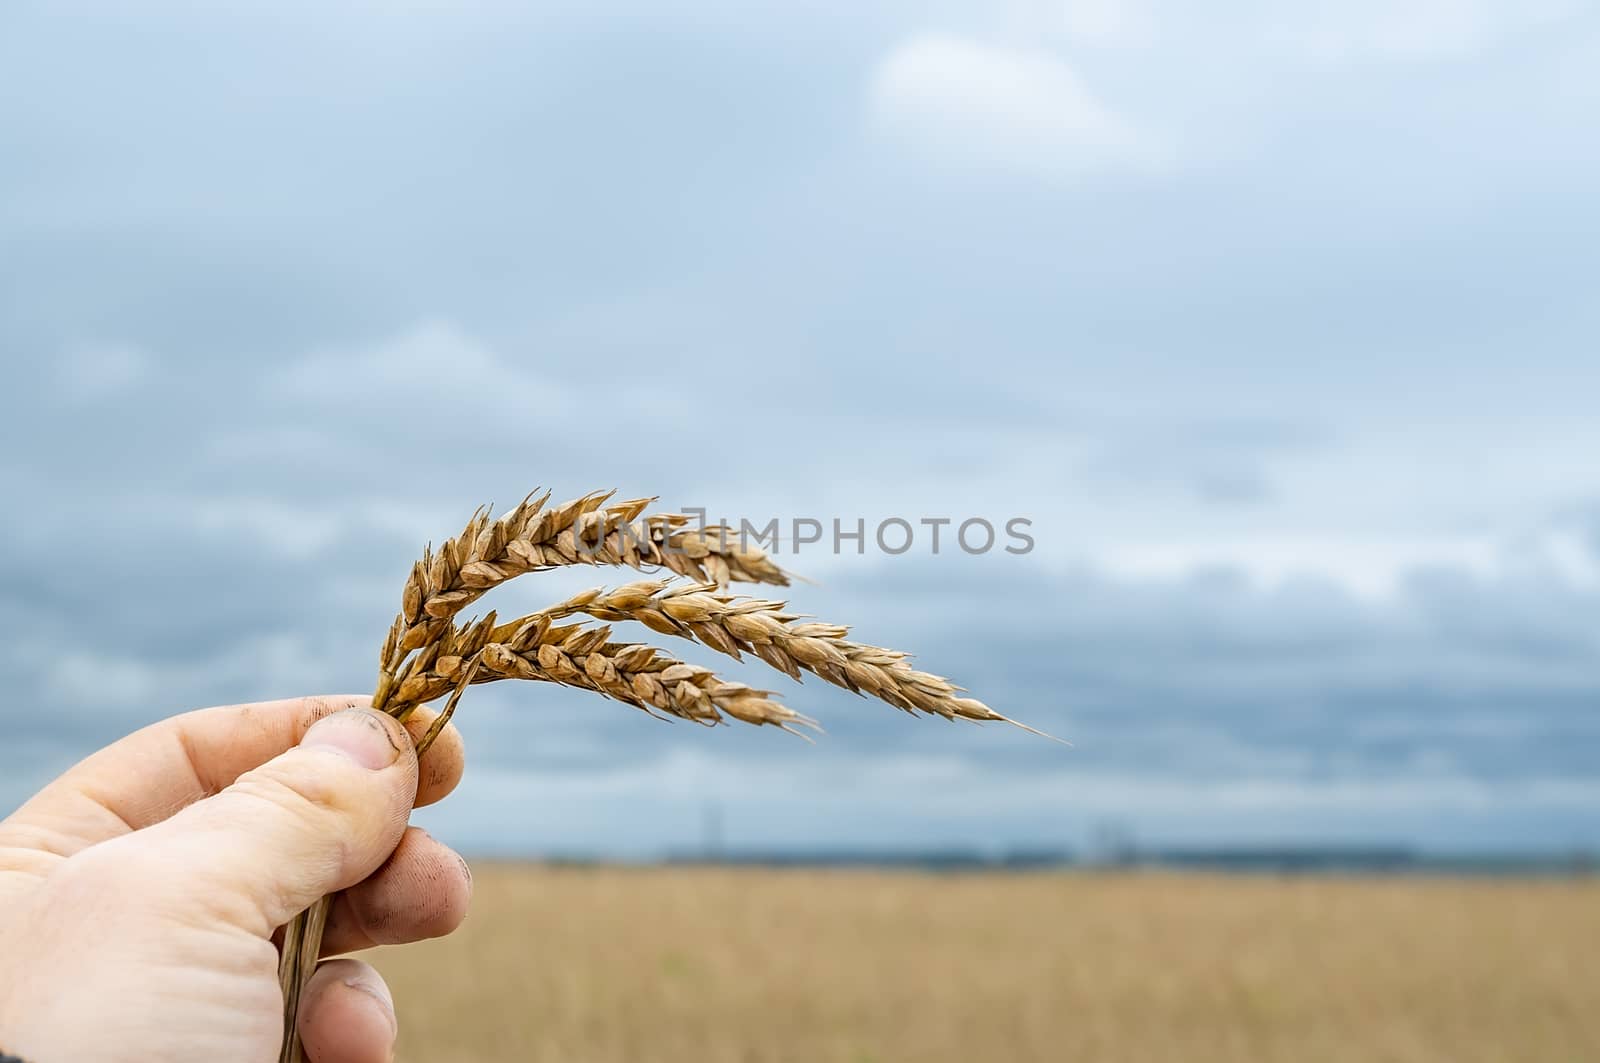 spikelet with wheat grains in the hand of a man on the background of a wheat agricultural field